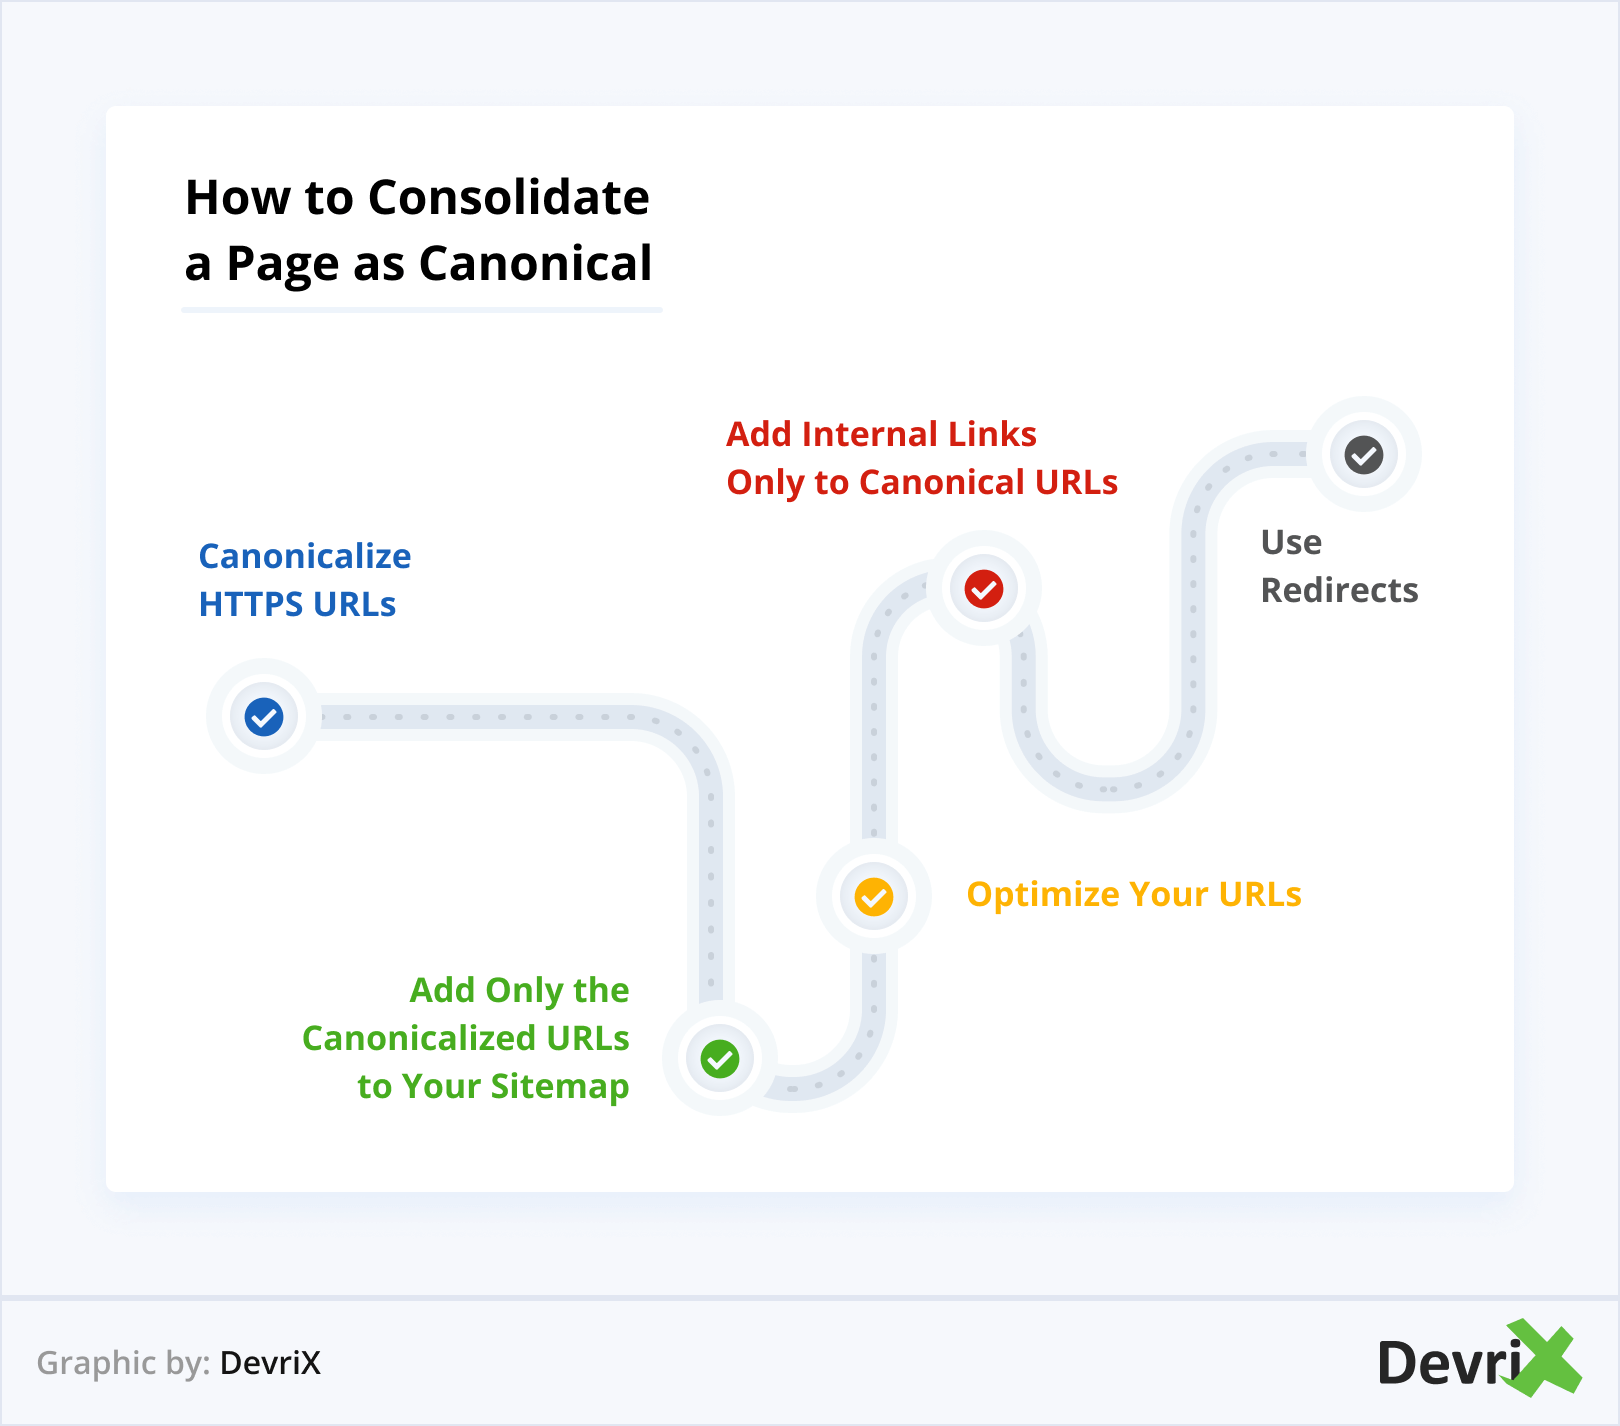 How to Consolidate a Page as Canonical